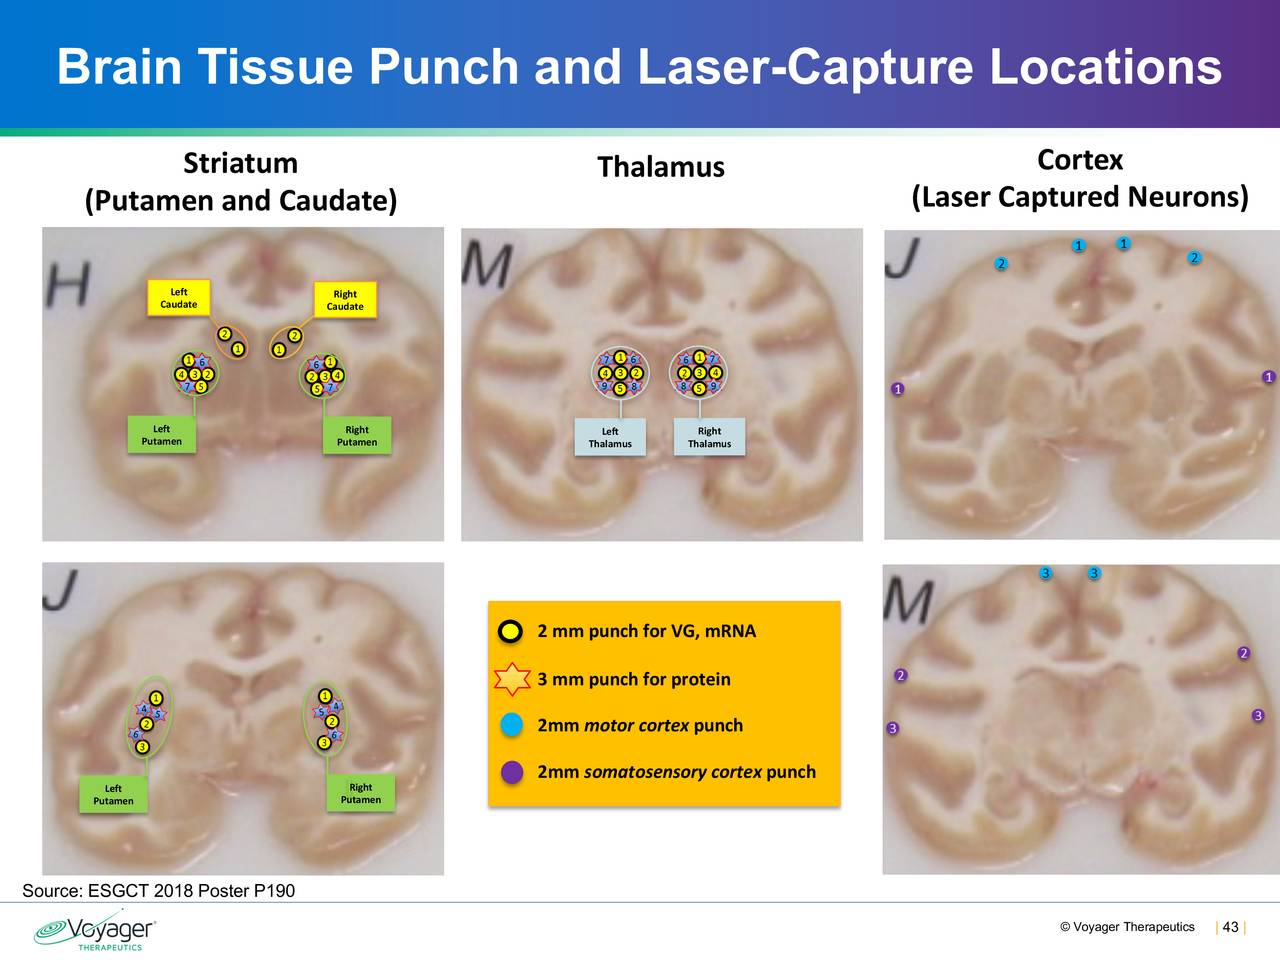 Brain Tissue Punch and Laser-Capture Locations